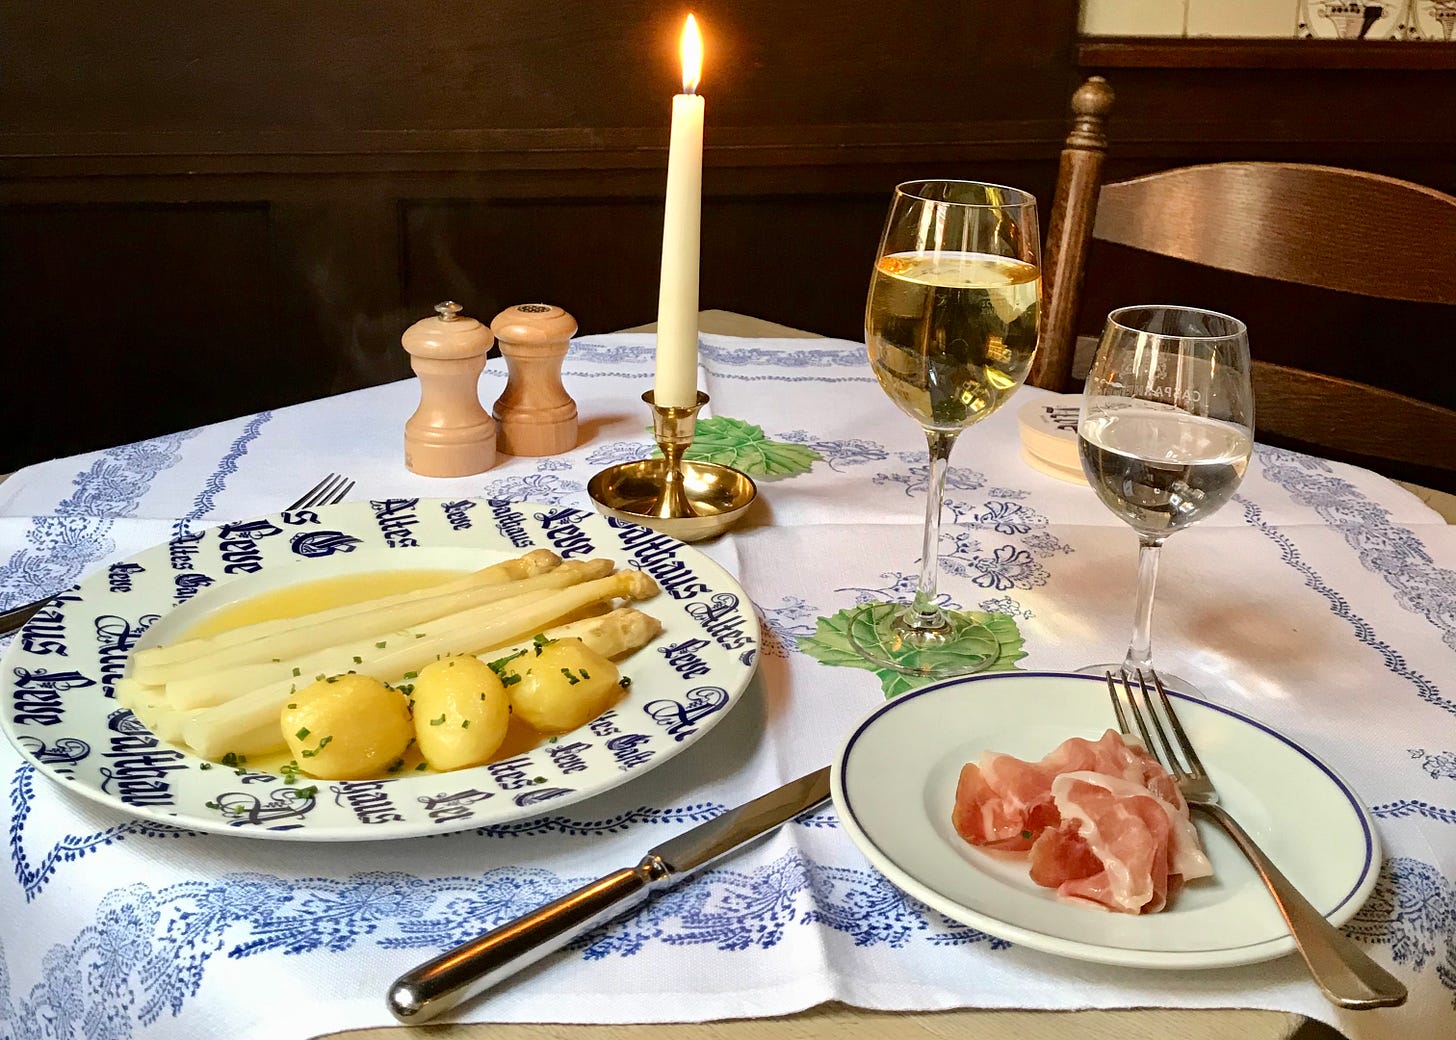 Plate of white asparagus with butter and ham, and a side plate of ham, plus wine glass and water glass, candle and salt and pepper on a blue and white tablecloth